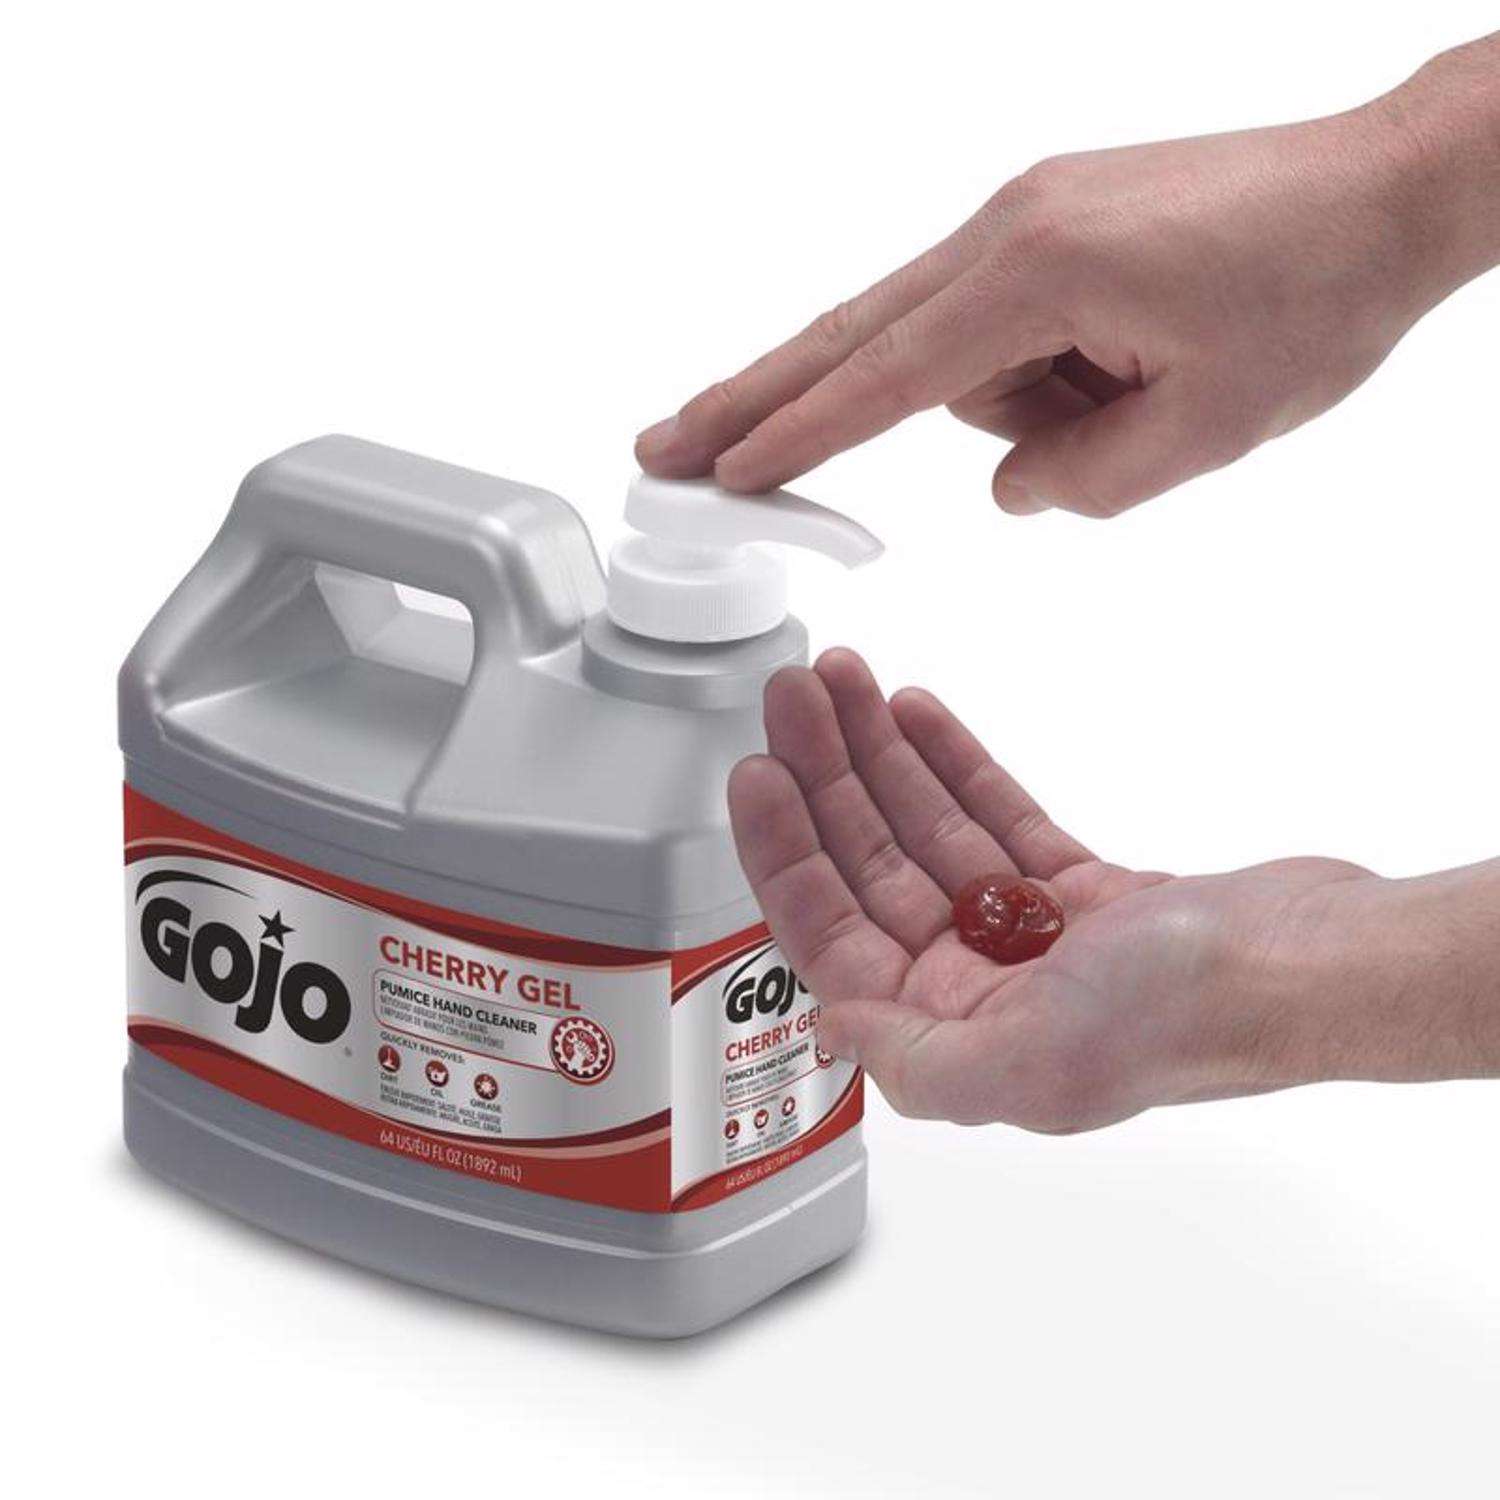  GOJO Cherry Gel Pumice Hand Cleaner, Cherry Scent, 10 Oz Bottle  : Beauty & Personal Care